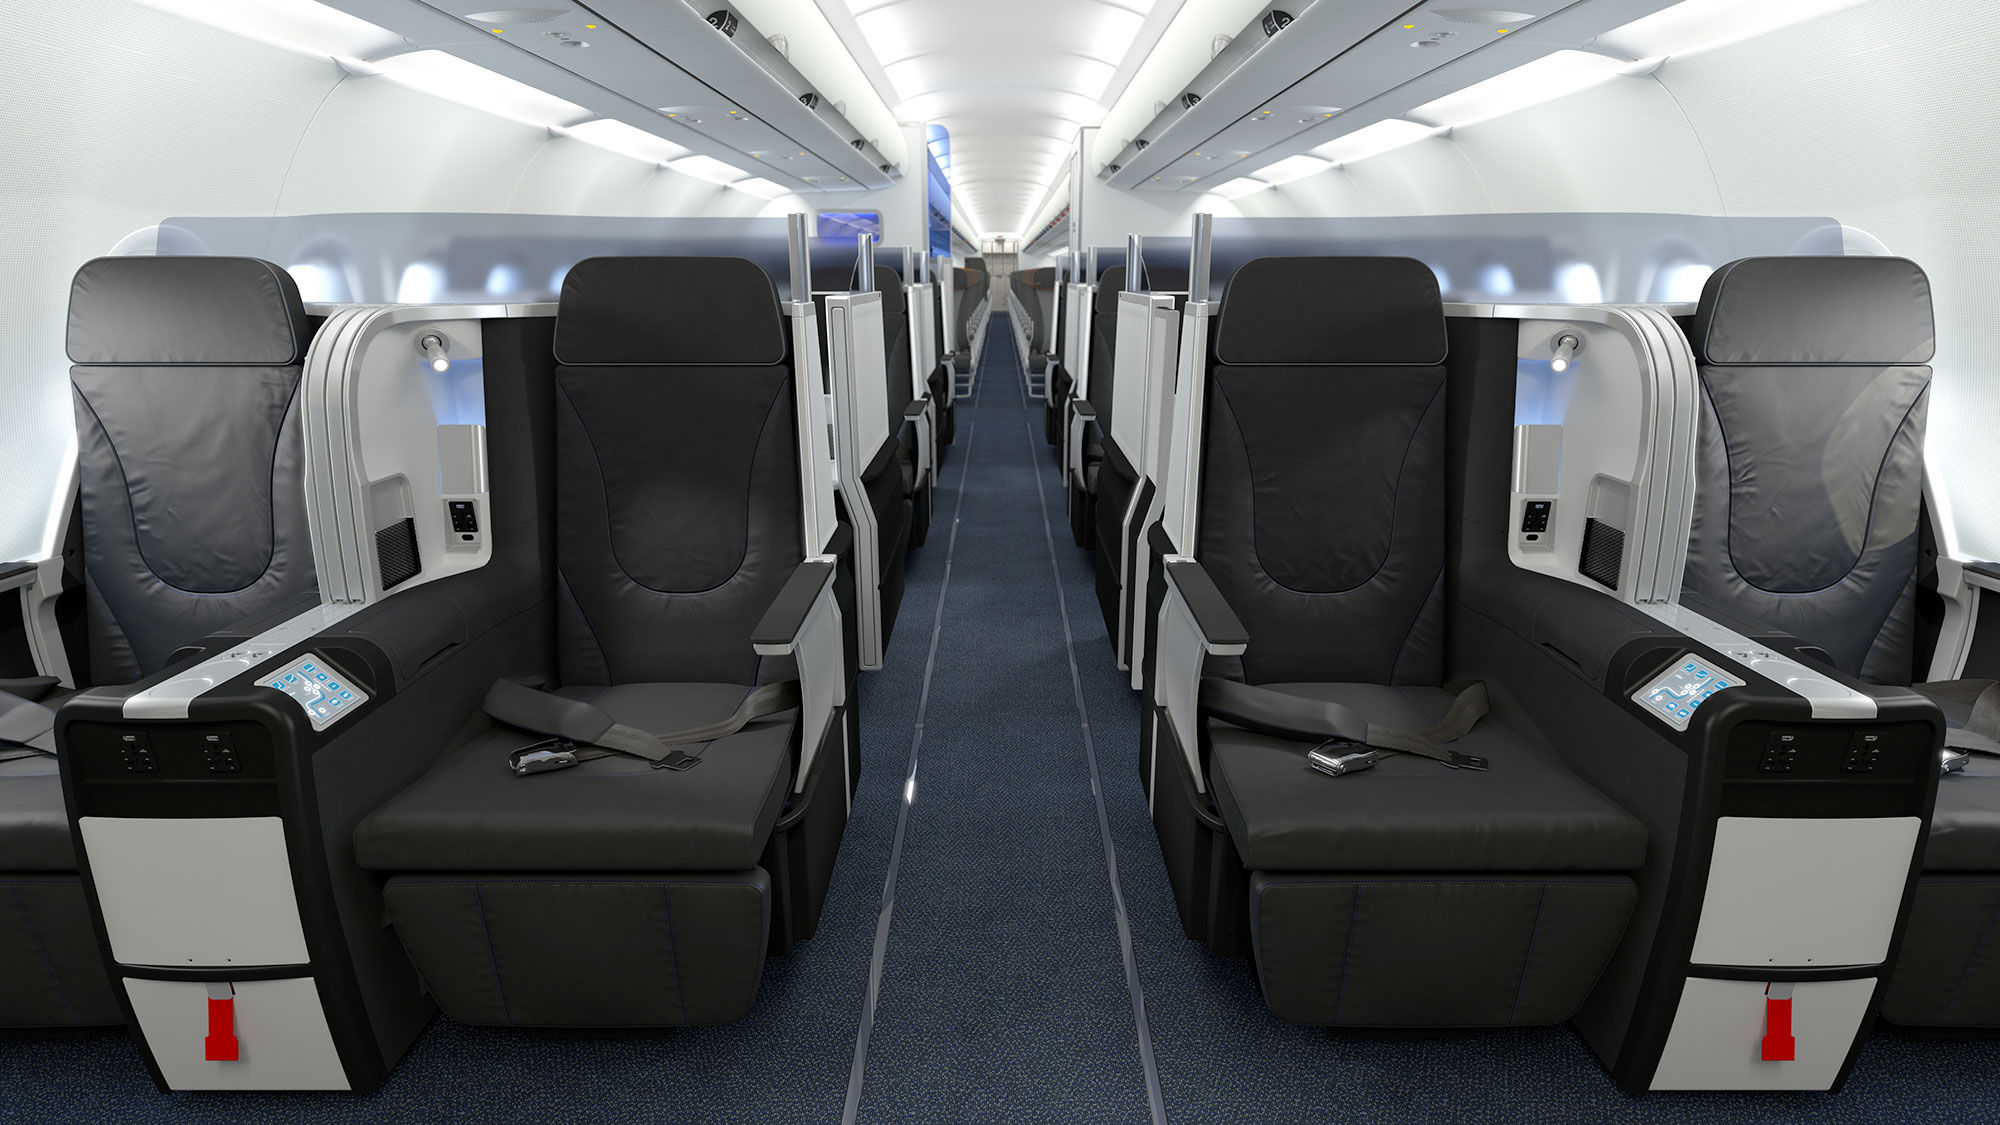 JetBlue's Mint cabin topped J.D. Power's survey for first/business class.